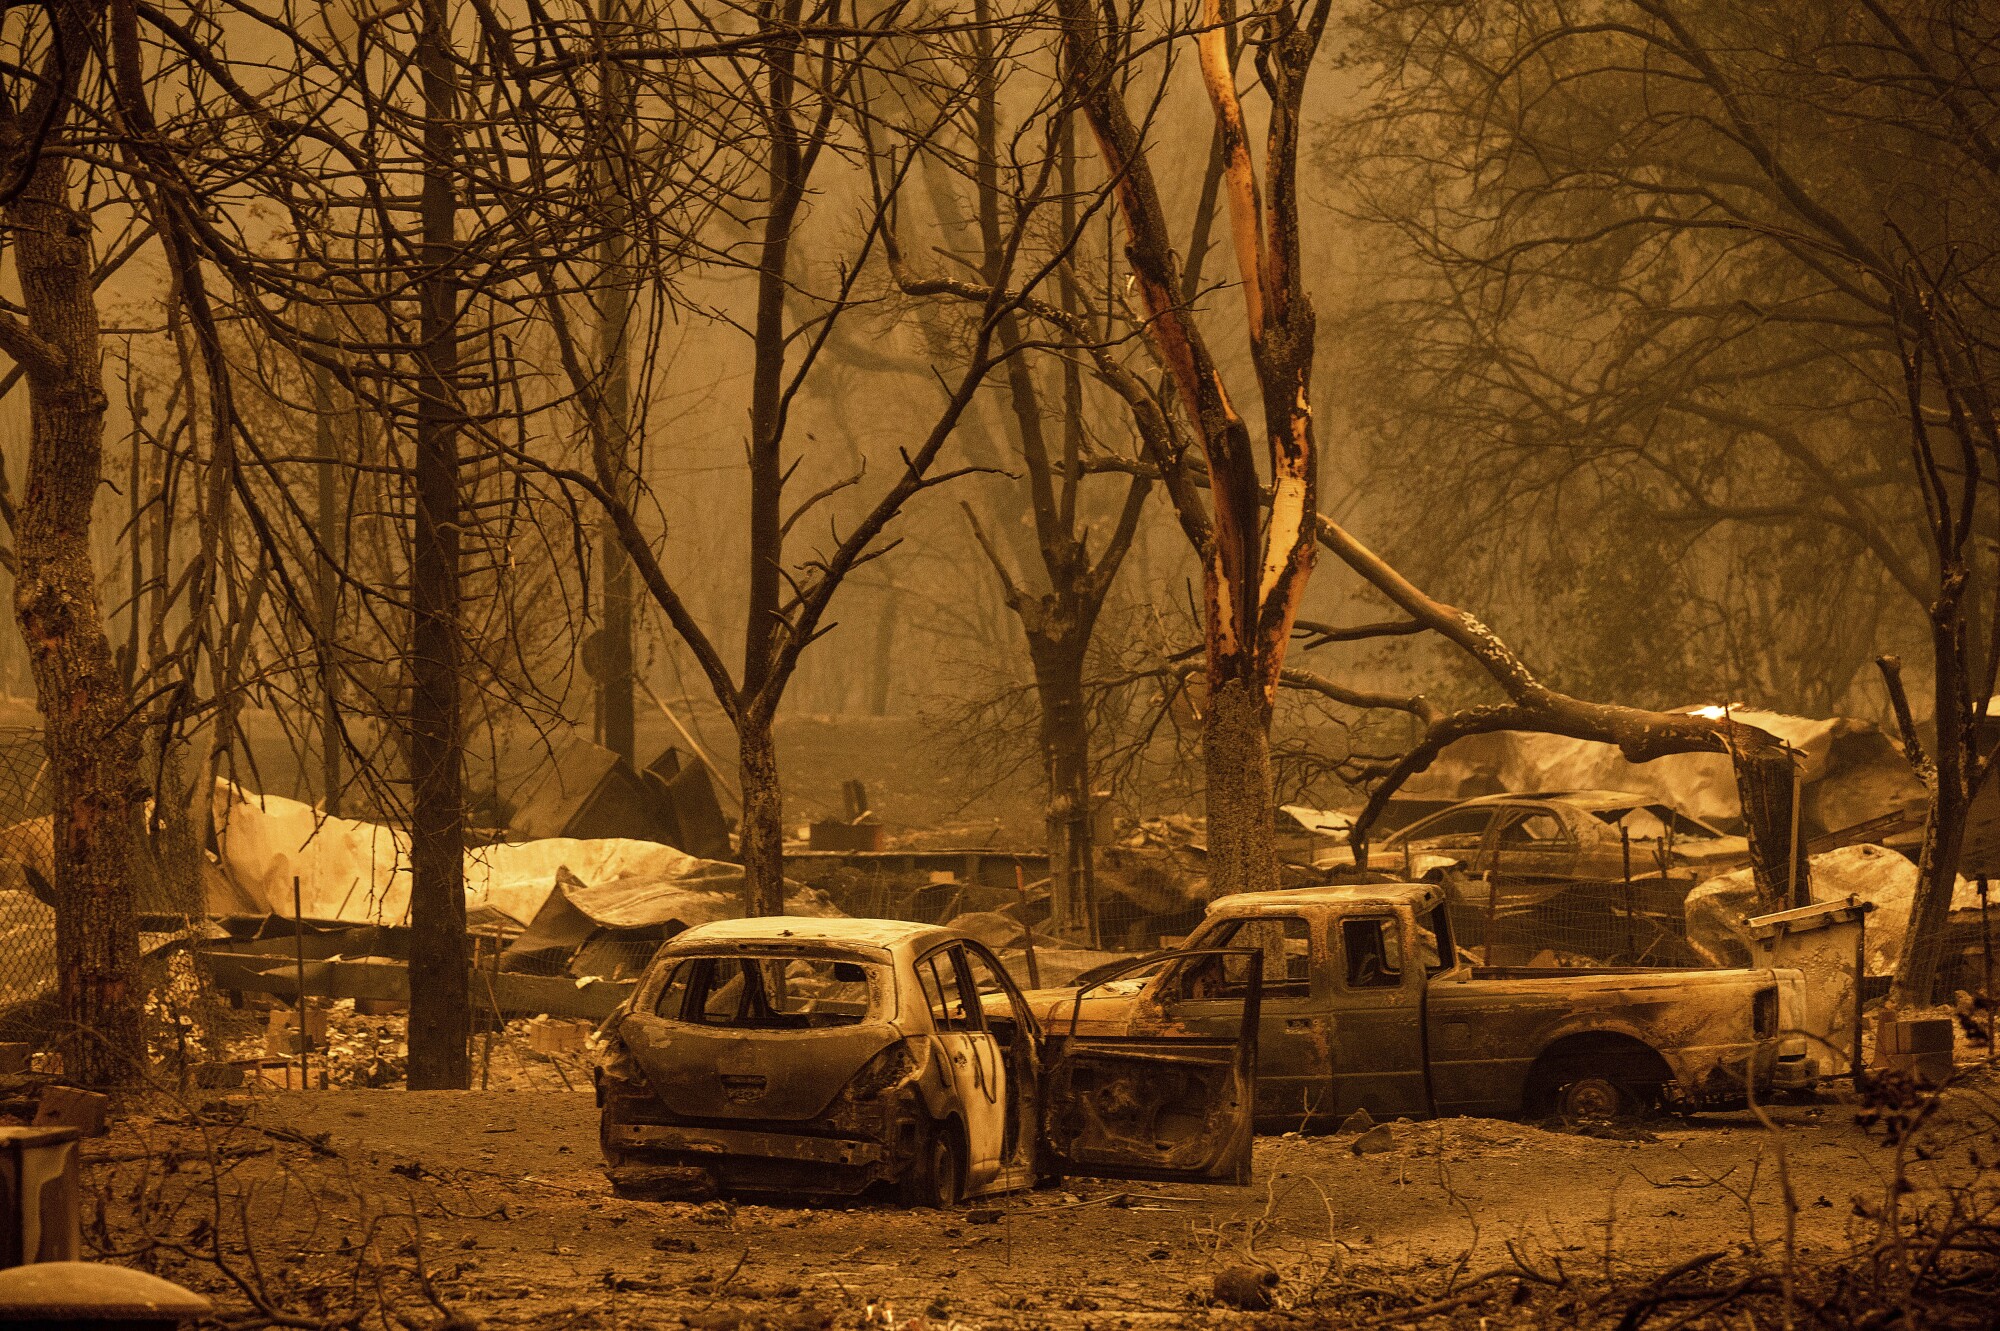 Homes, cars and trees are charred in a smoky landscape.